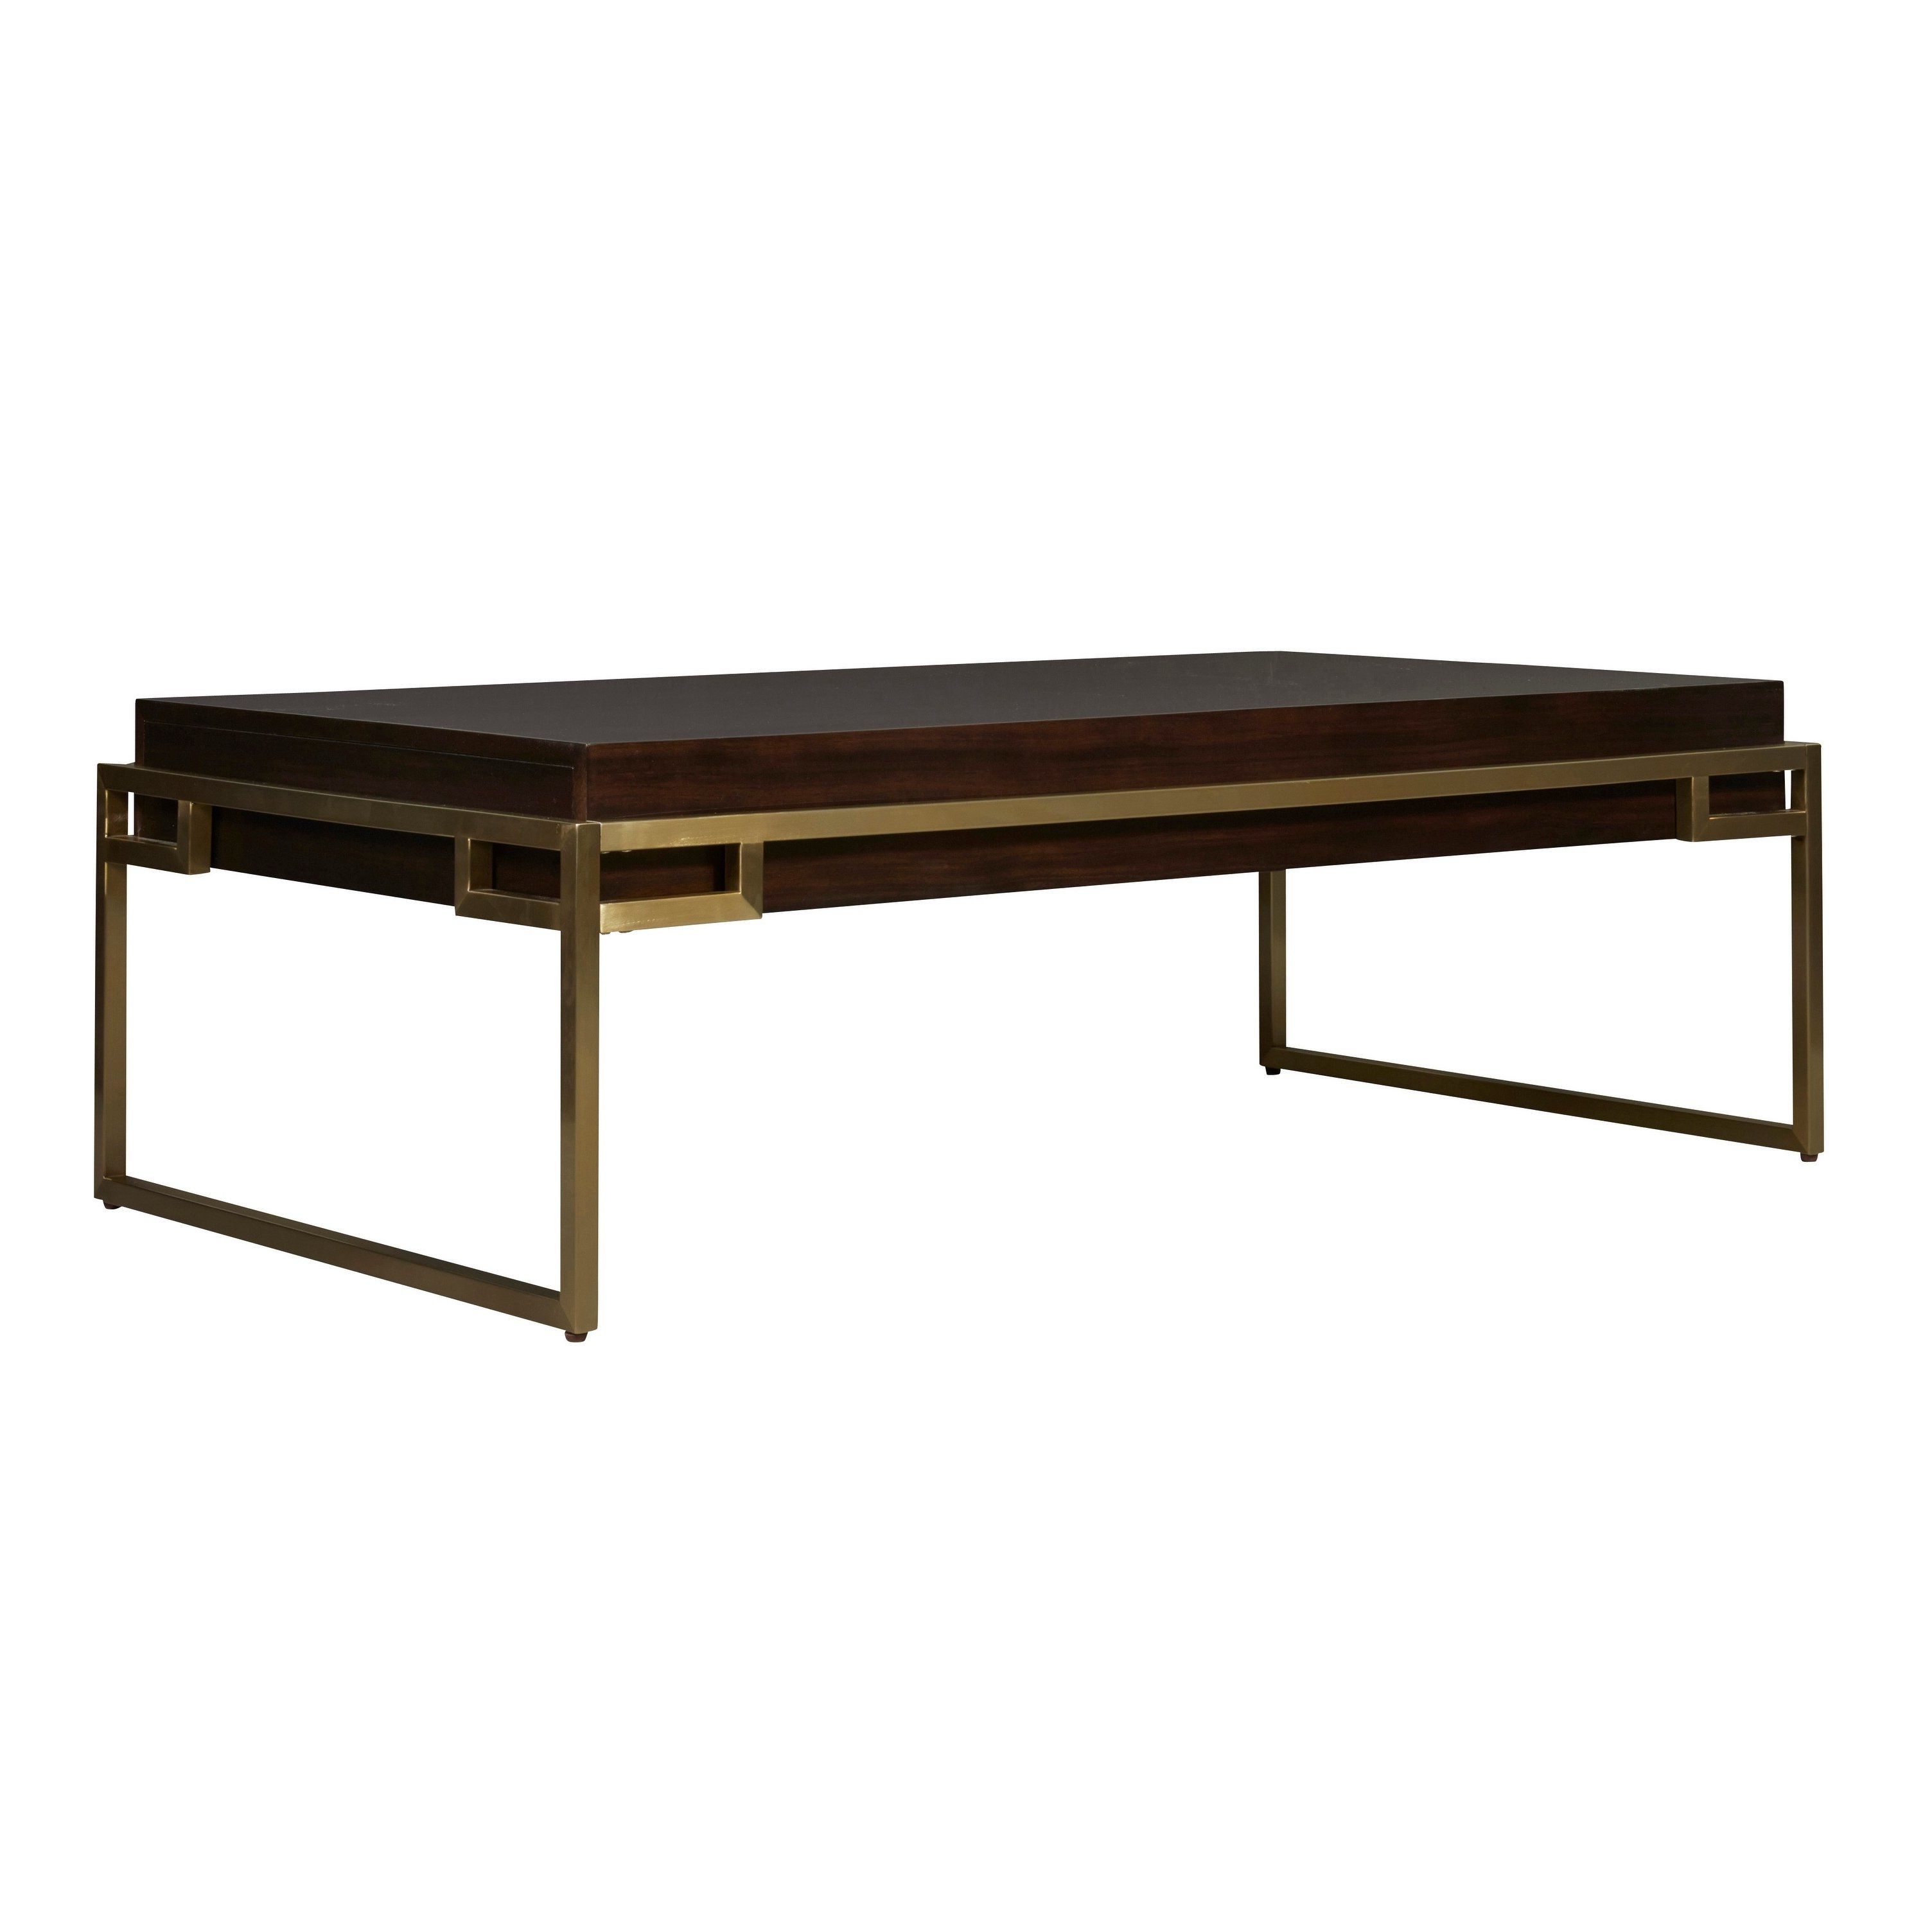 Rectangular Coffee Tables With Brass Legs Inside 2019 Shop Modern Brushed Brass And Mahogany Rectangle Hayworth Cocktail (View 19 of 20)